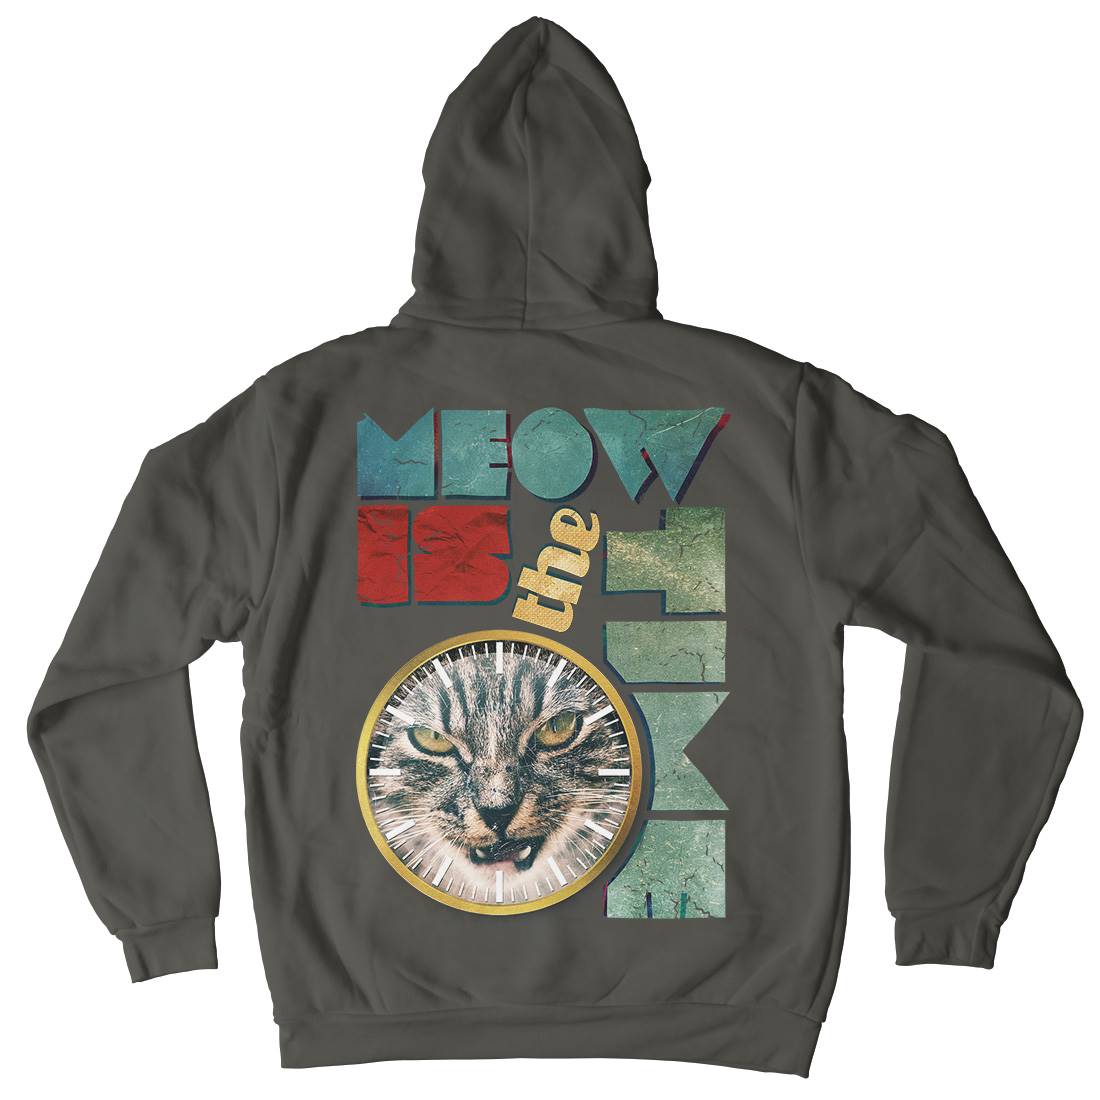 Meow Is The Time Mens Hoodie With Pocket Animals A876